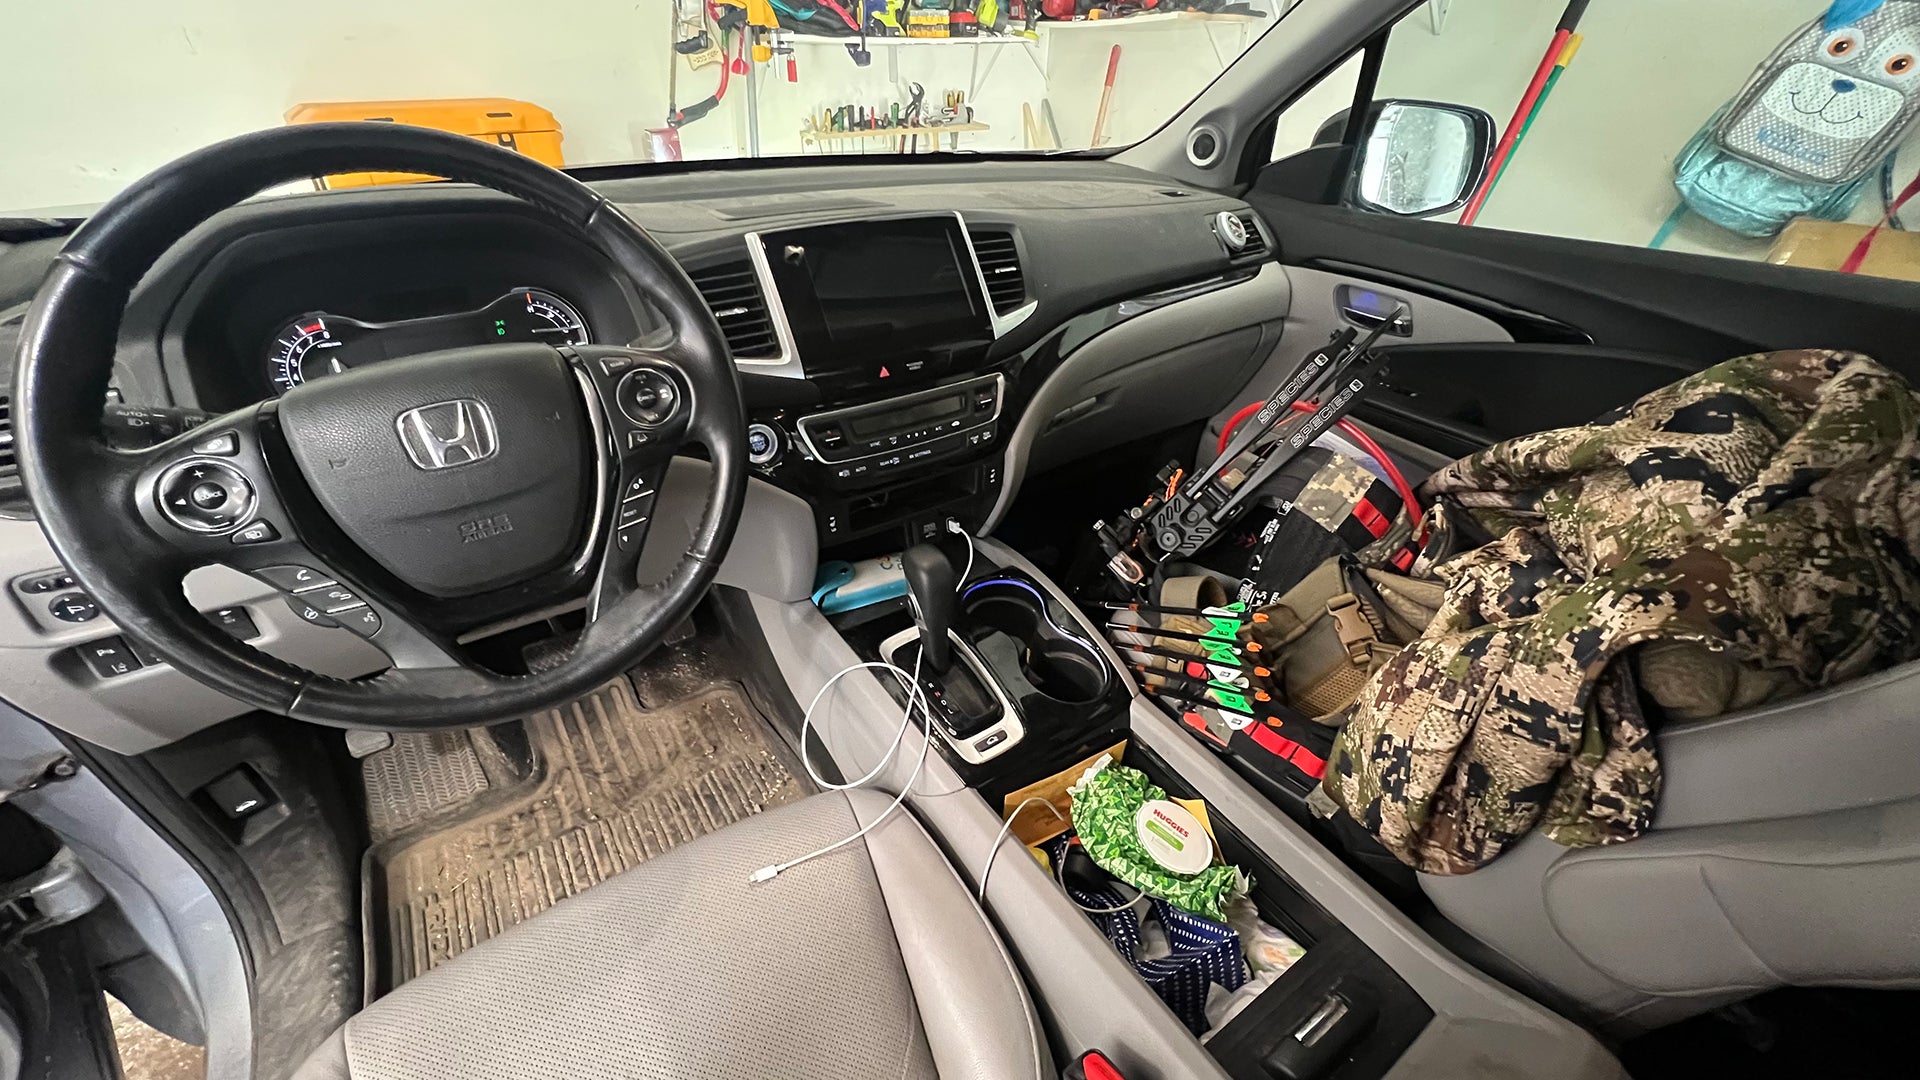 How To Keep Your Car Interior Clean All the Time ~ Even with Kids!